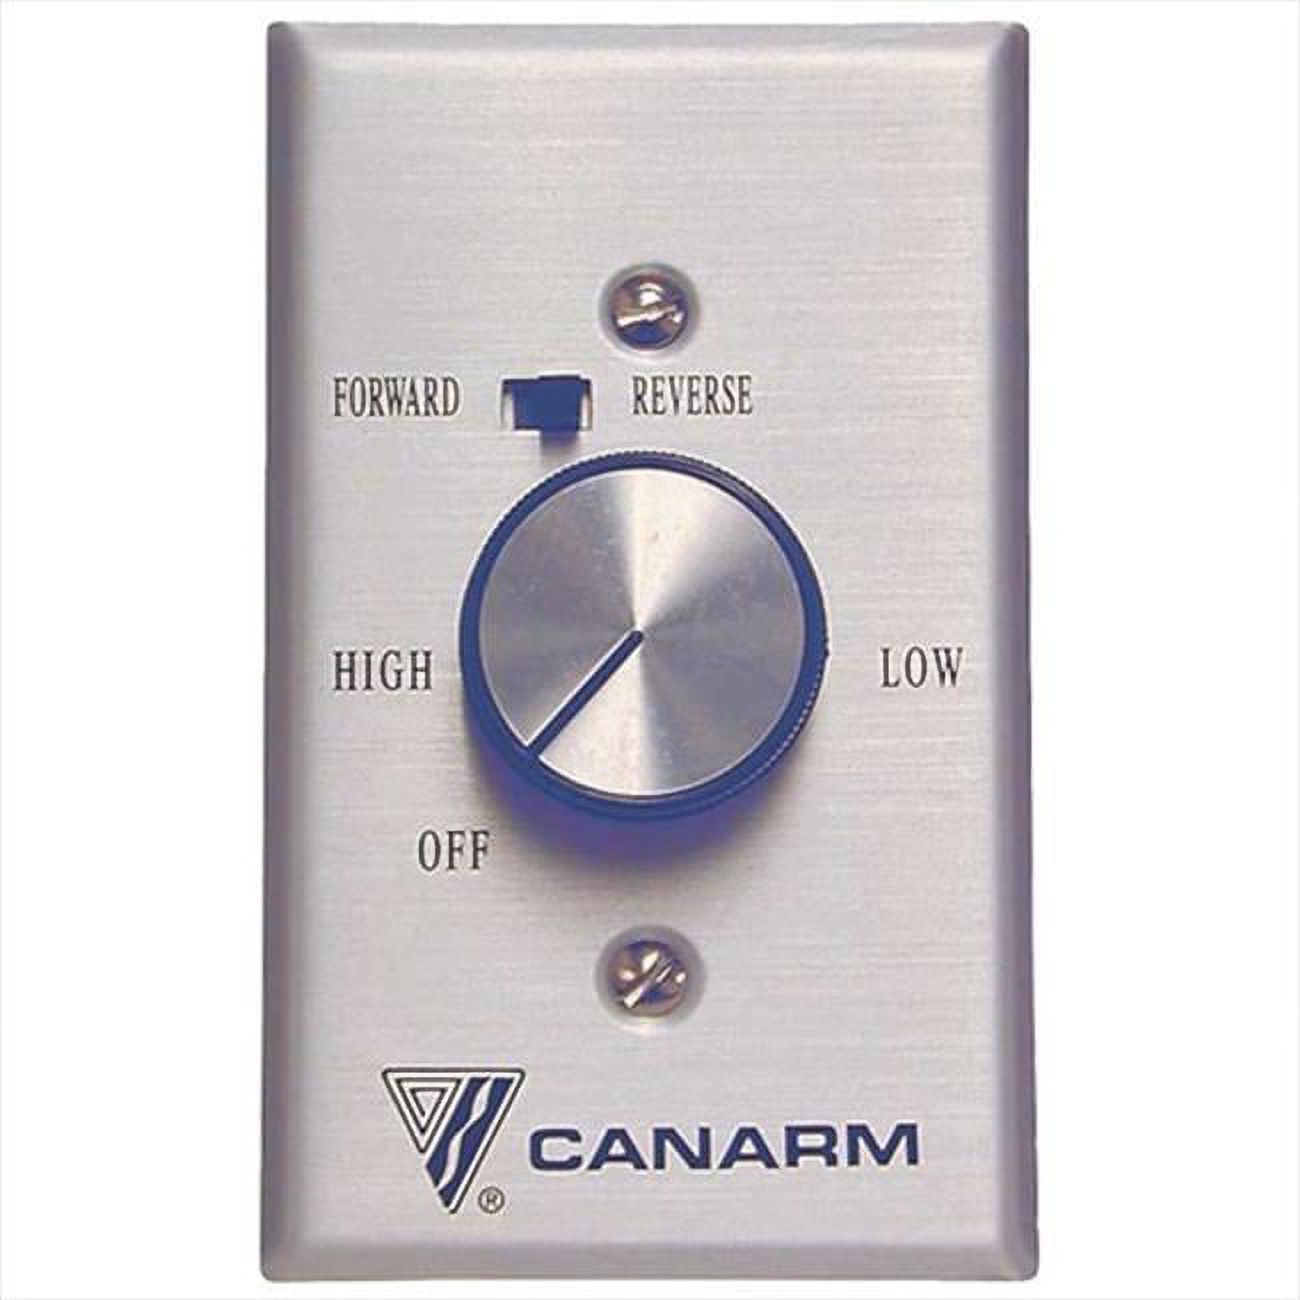 TekSupply 102322 Canarm Manual Ceiling Fan Controller 2-Way - image 1 of 1